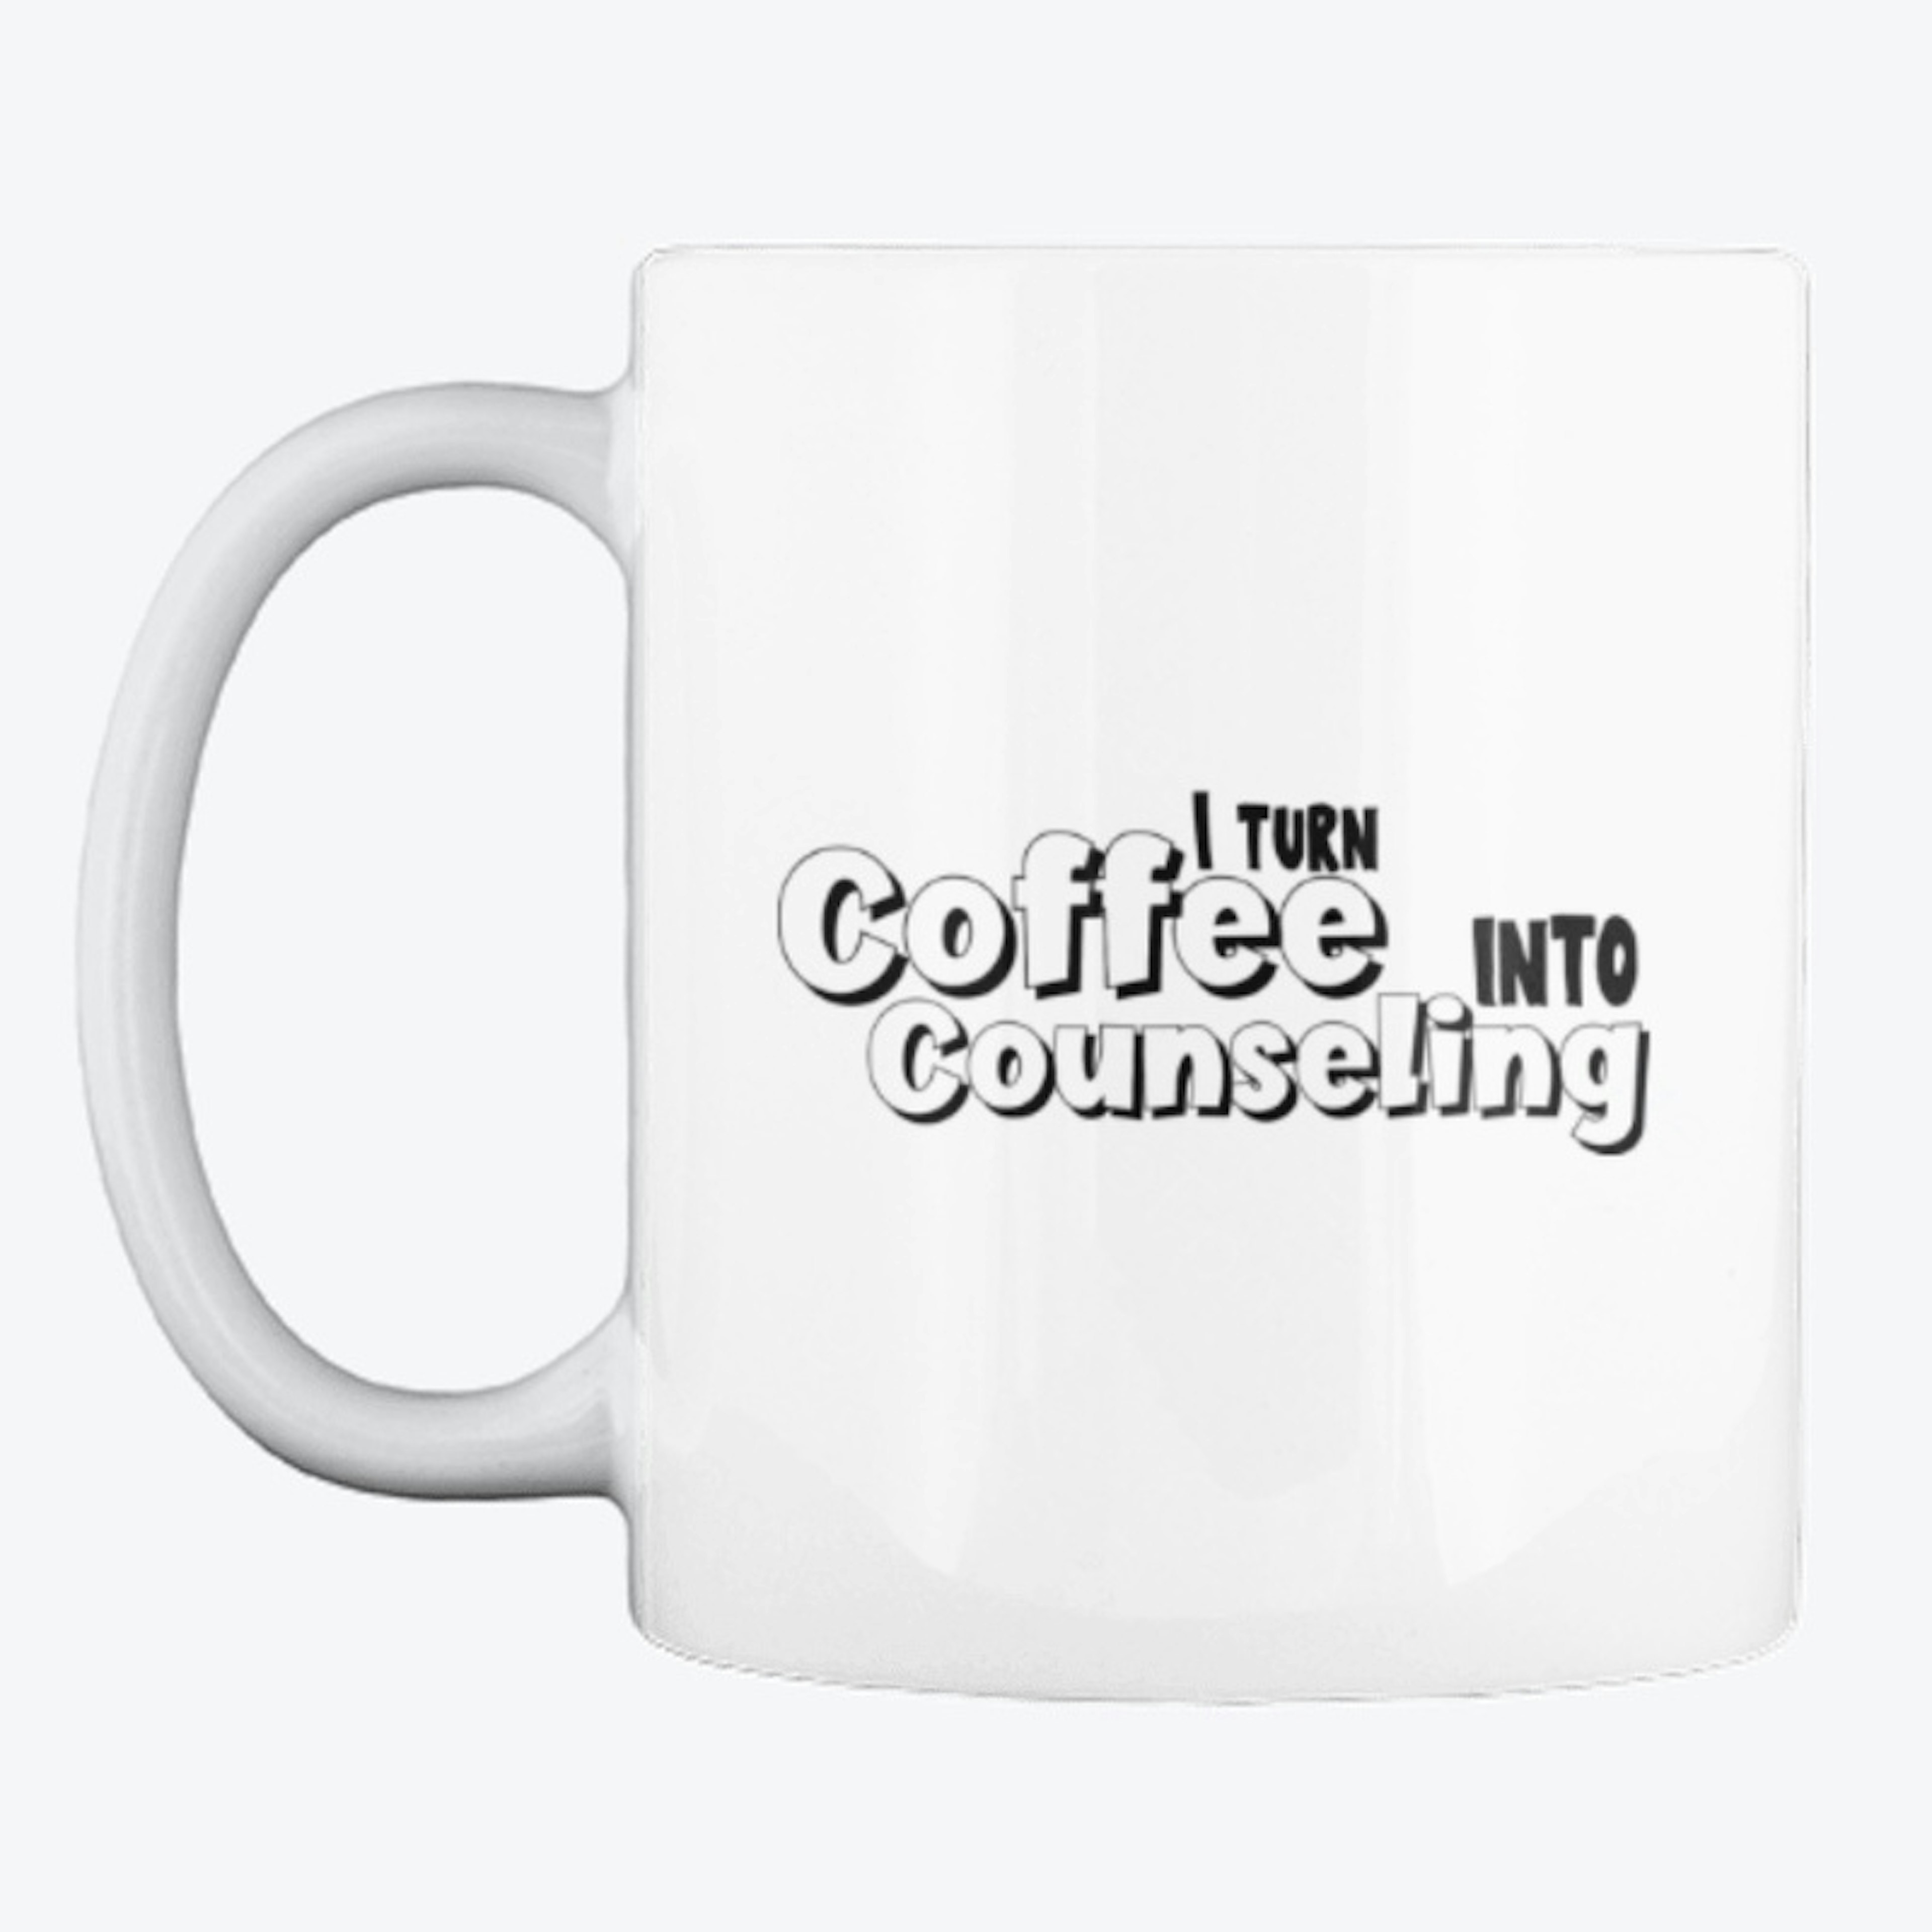 I turn coffee into counseling